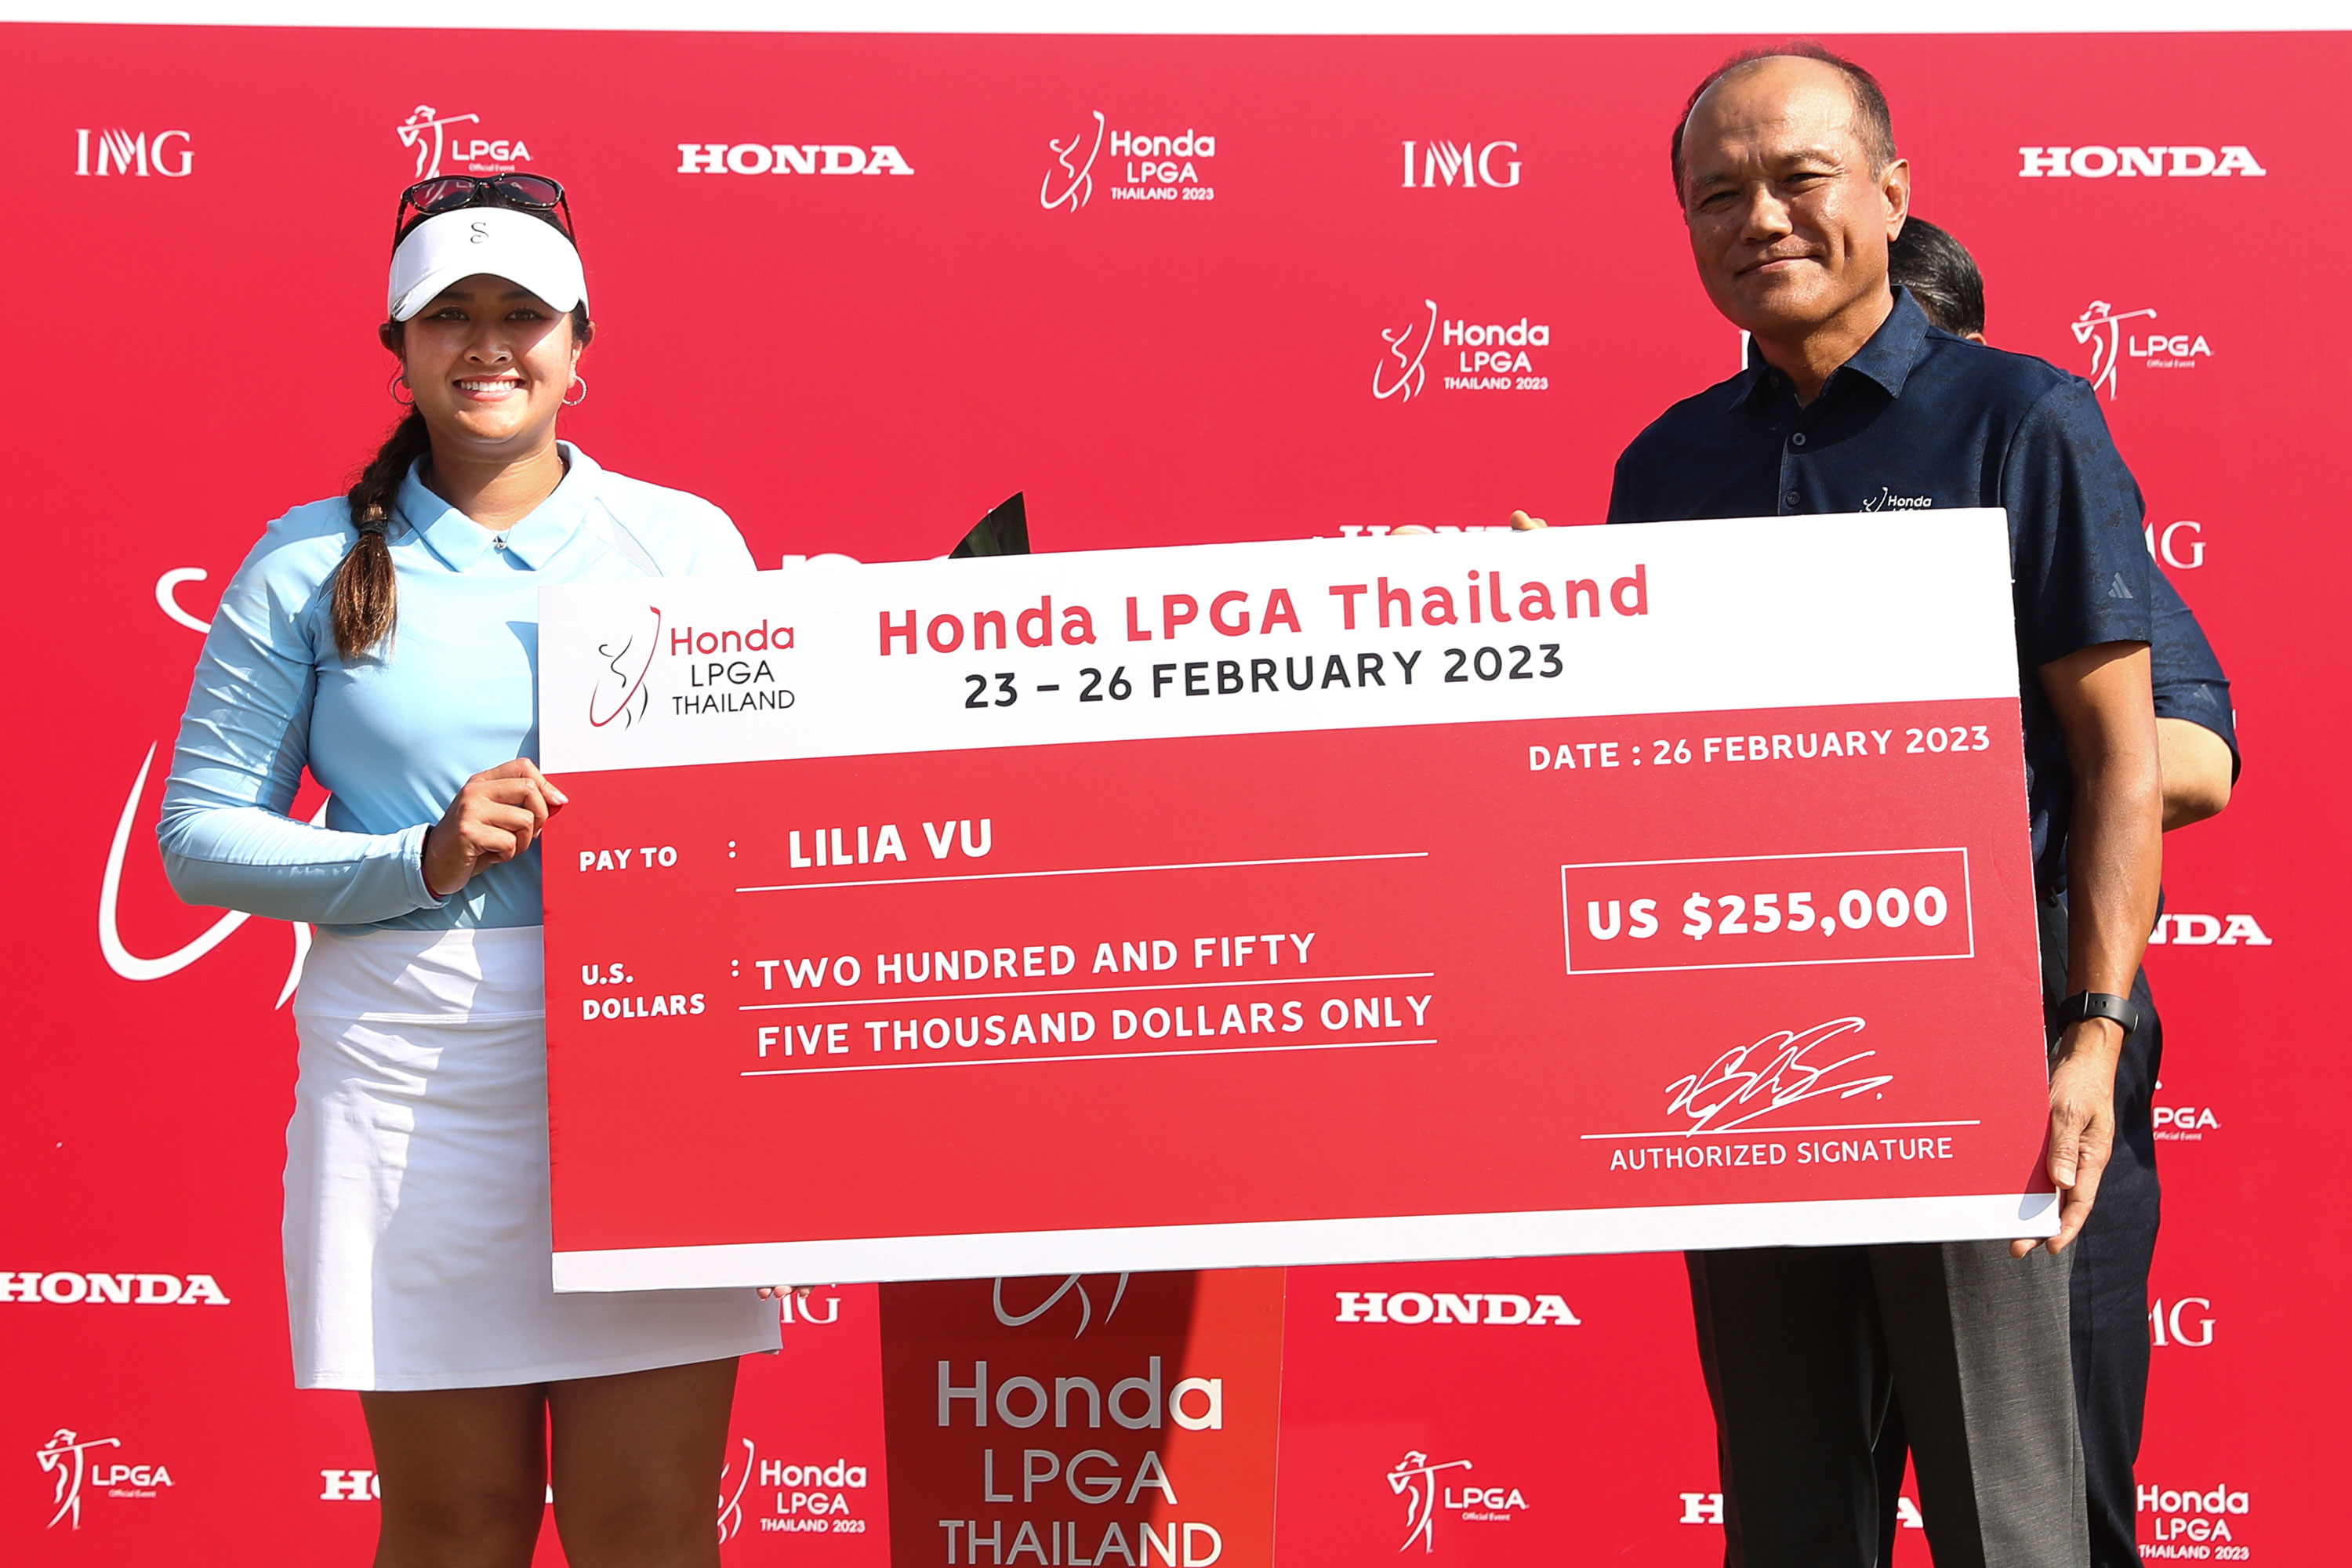 Angel Yin Gets Redemption in Playoff Victory at Buick LPGA Shanghai, LPGA